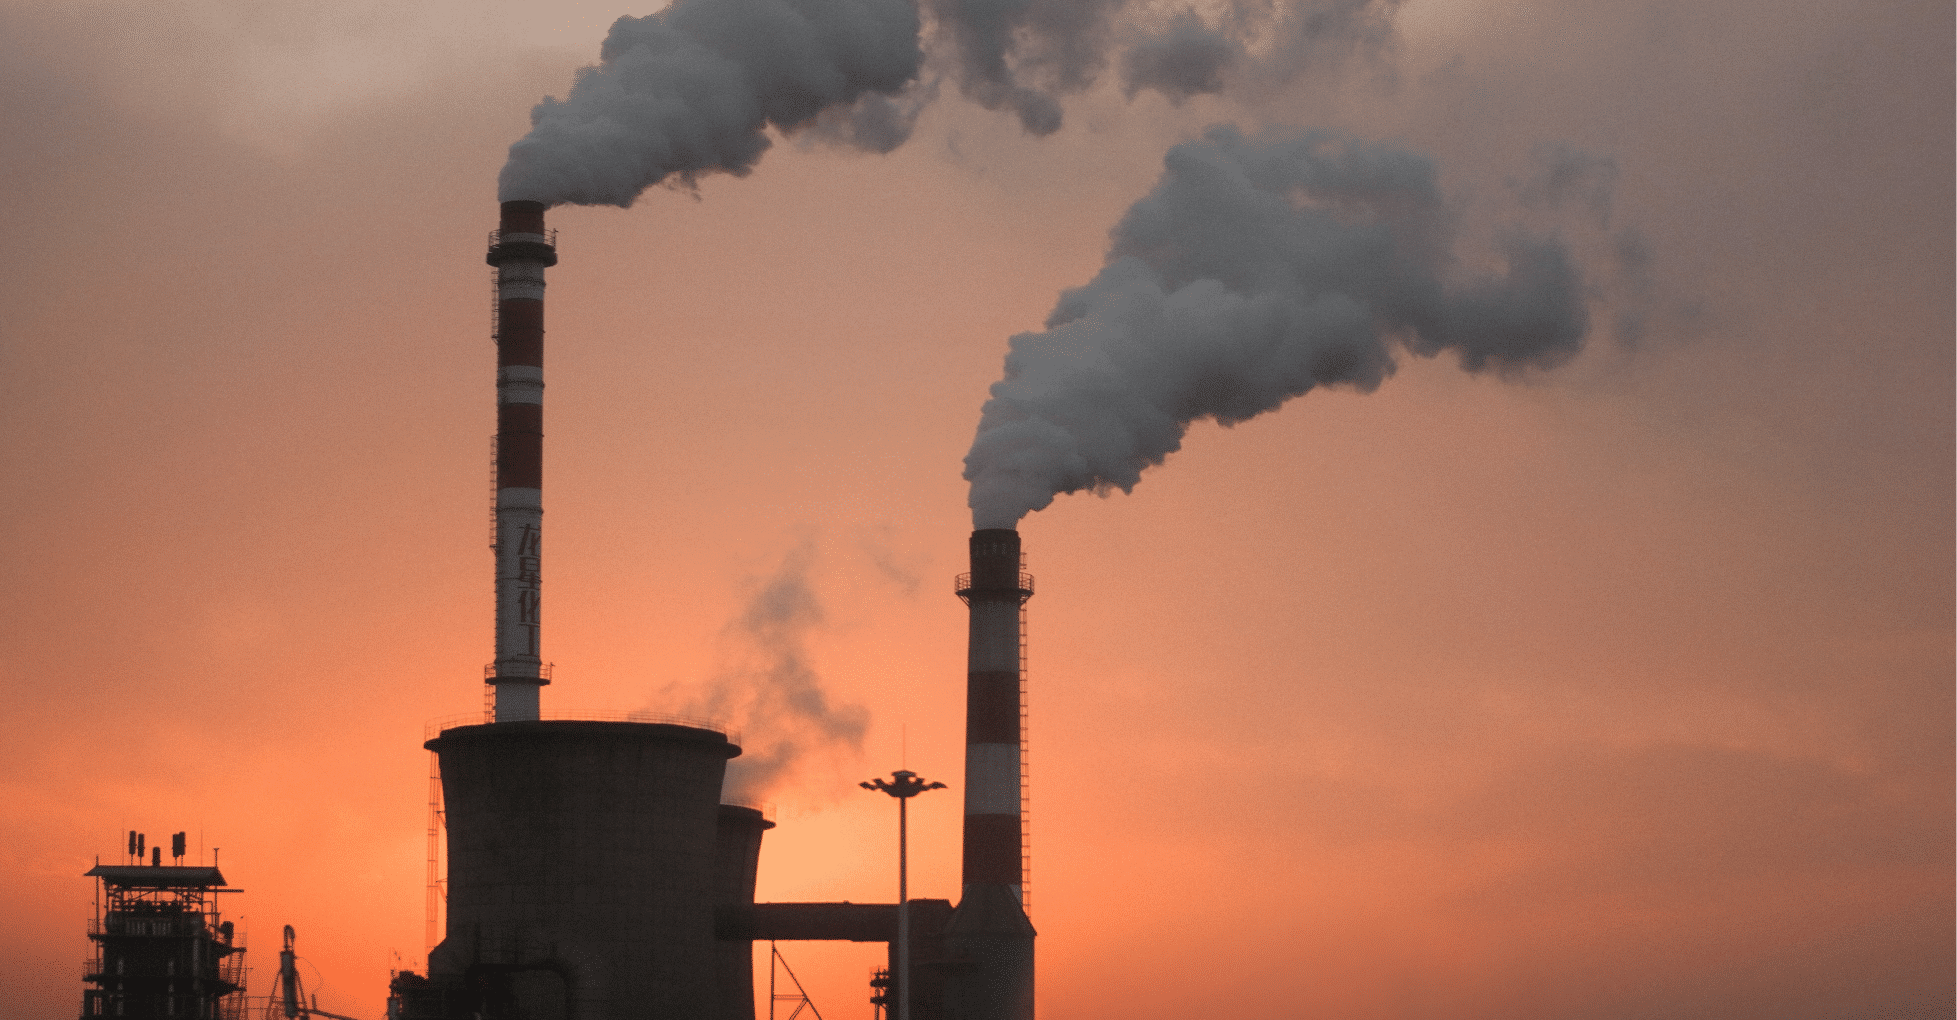 Factory polluting environment